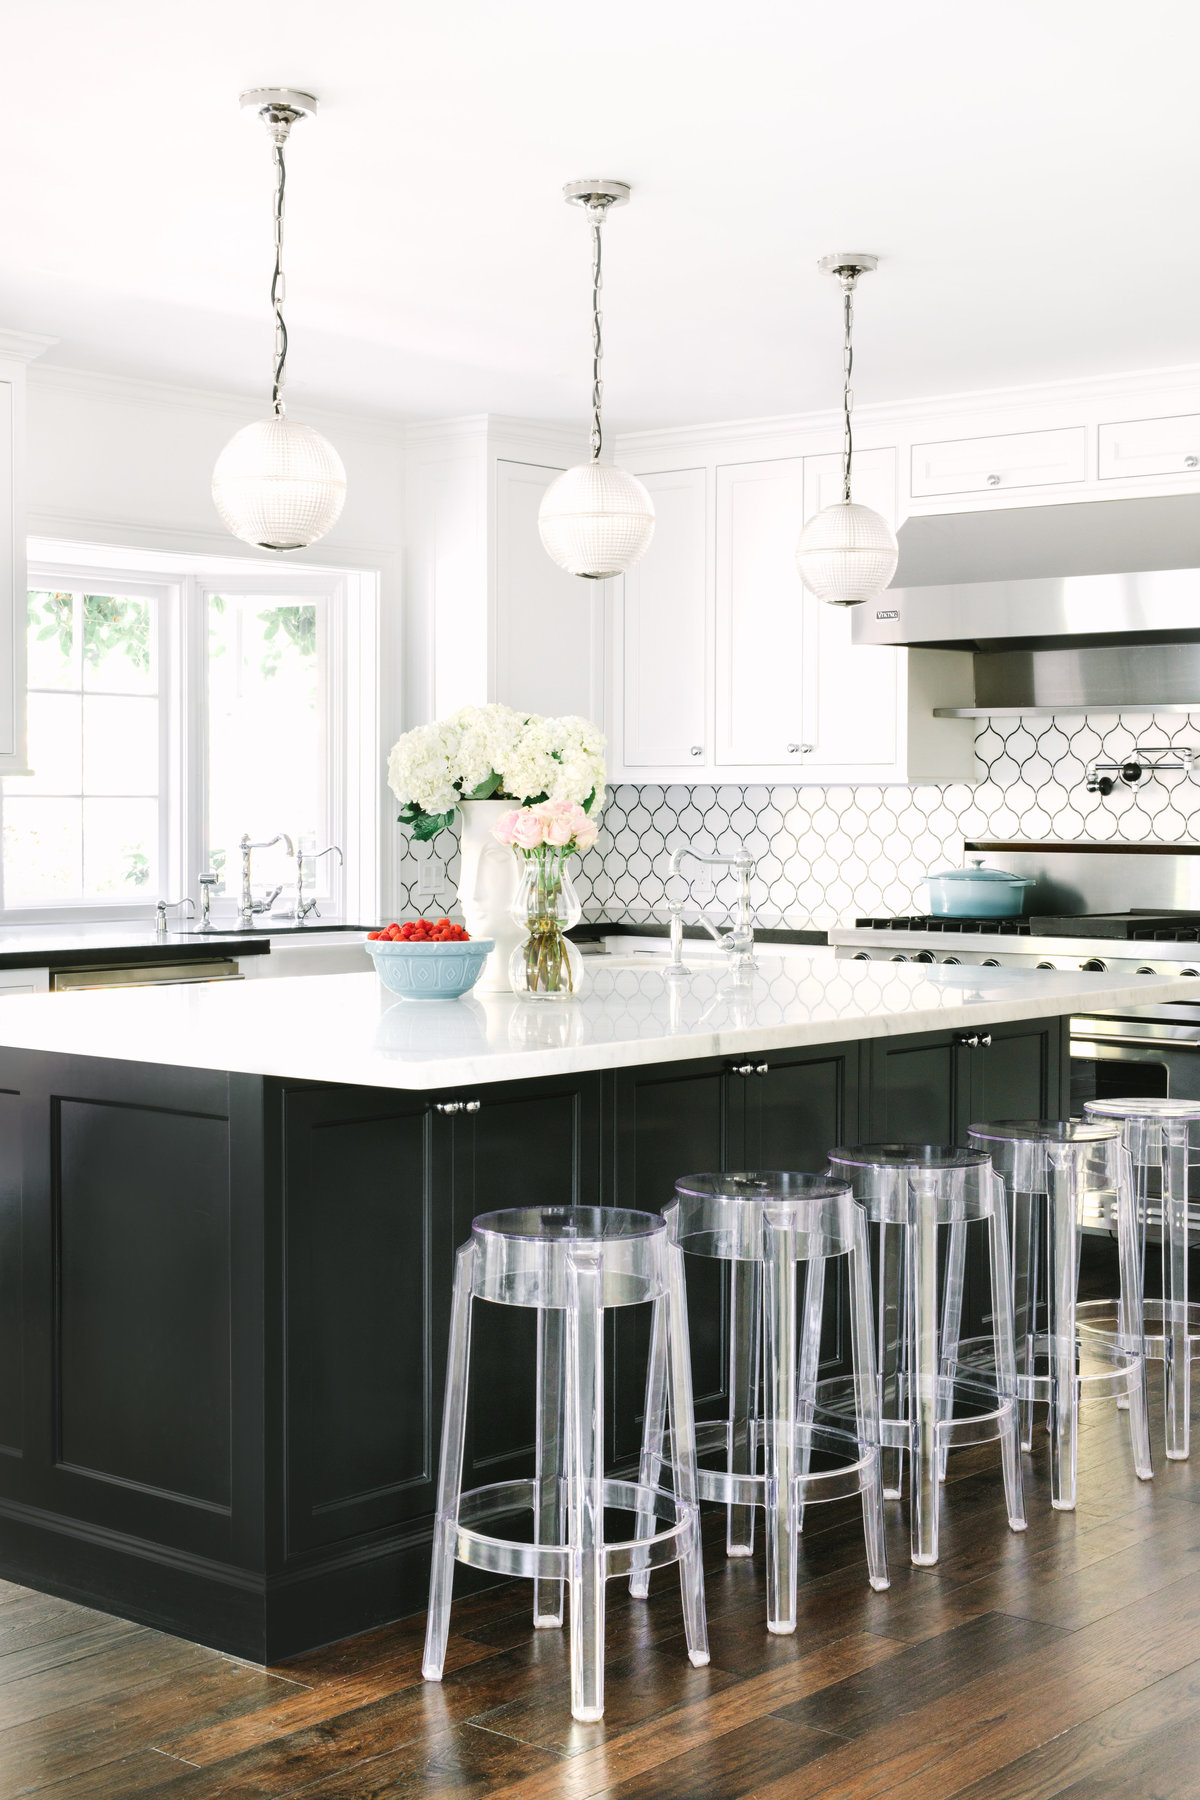 Classic, white kitchen with black island and Carrara marble counter